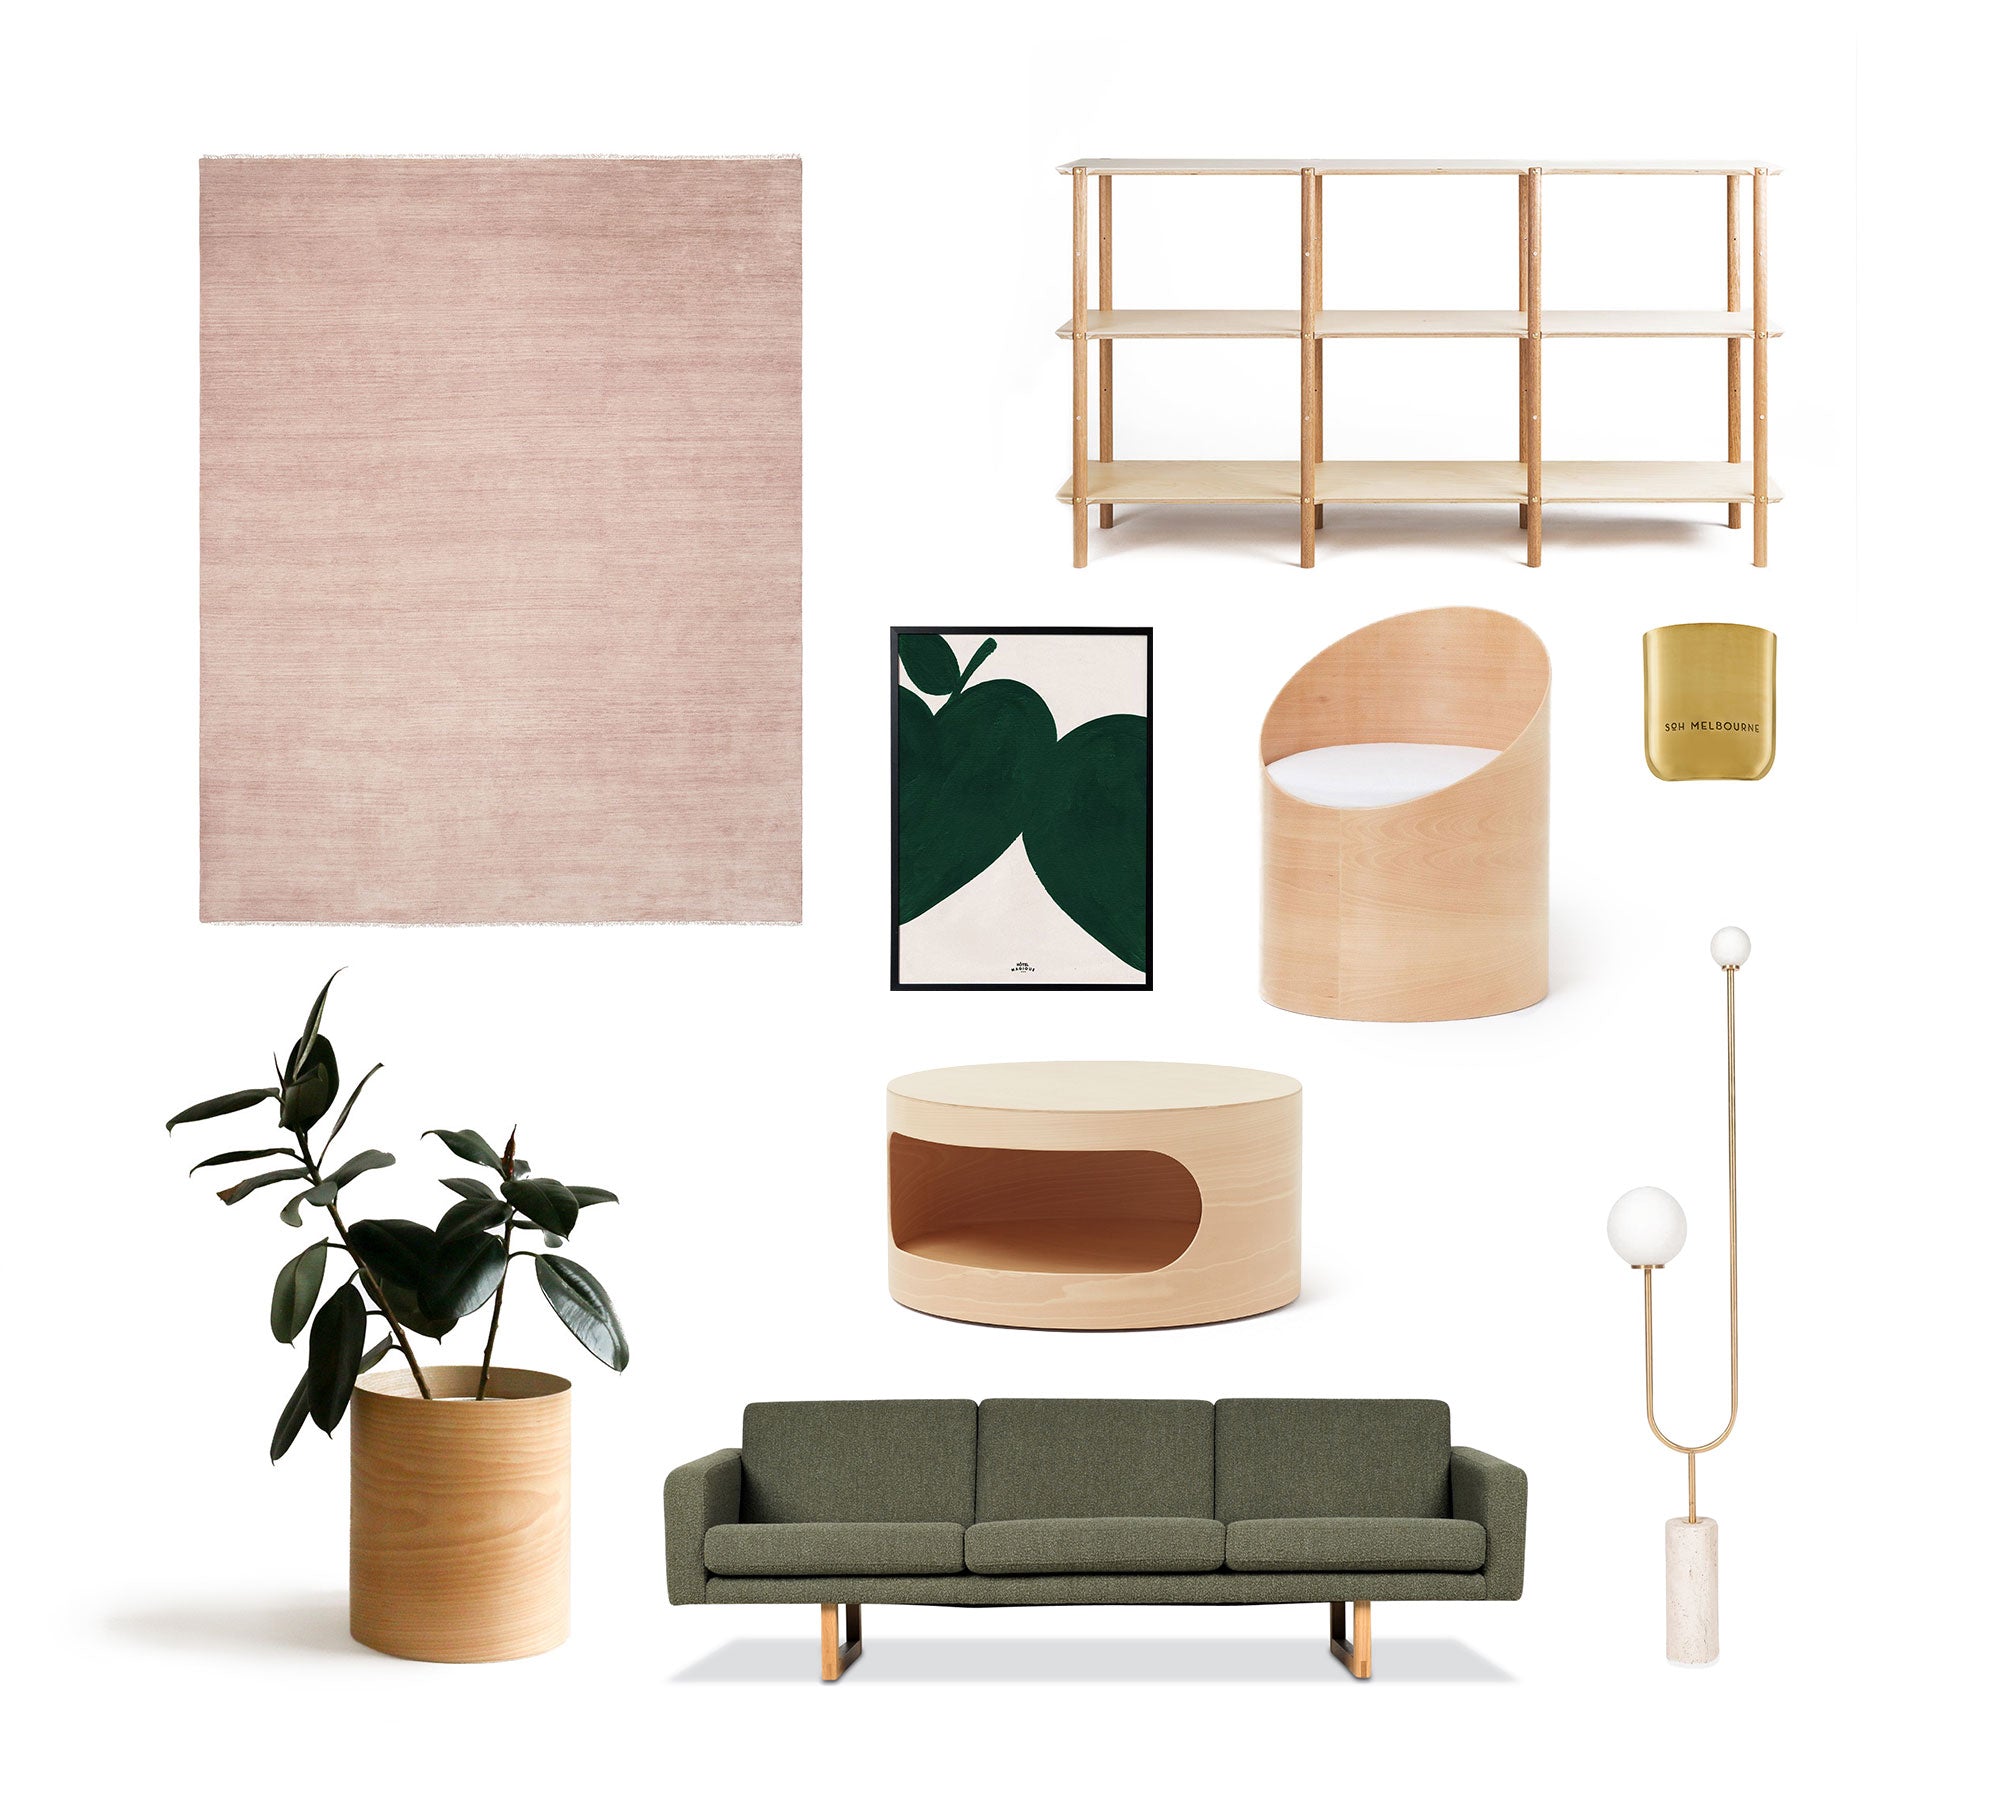 Modern Times and Armadillo & Co in a Luxury Interior Mood Board